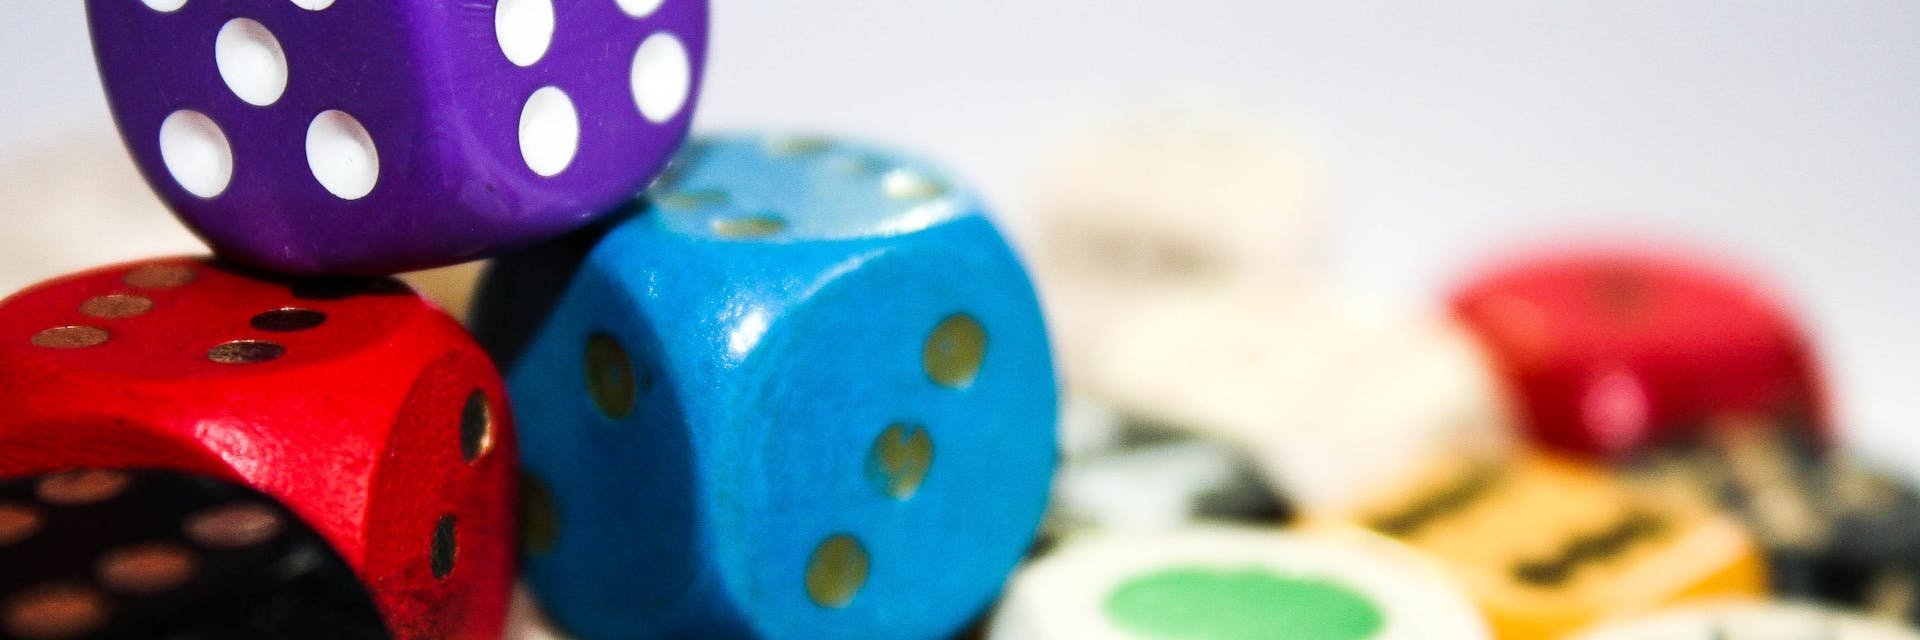 23 Exciting Math Games for Kids to Skyrocket New Math Skills in the Classroom